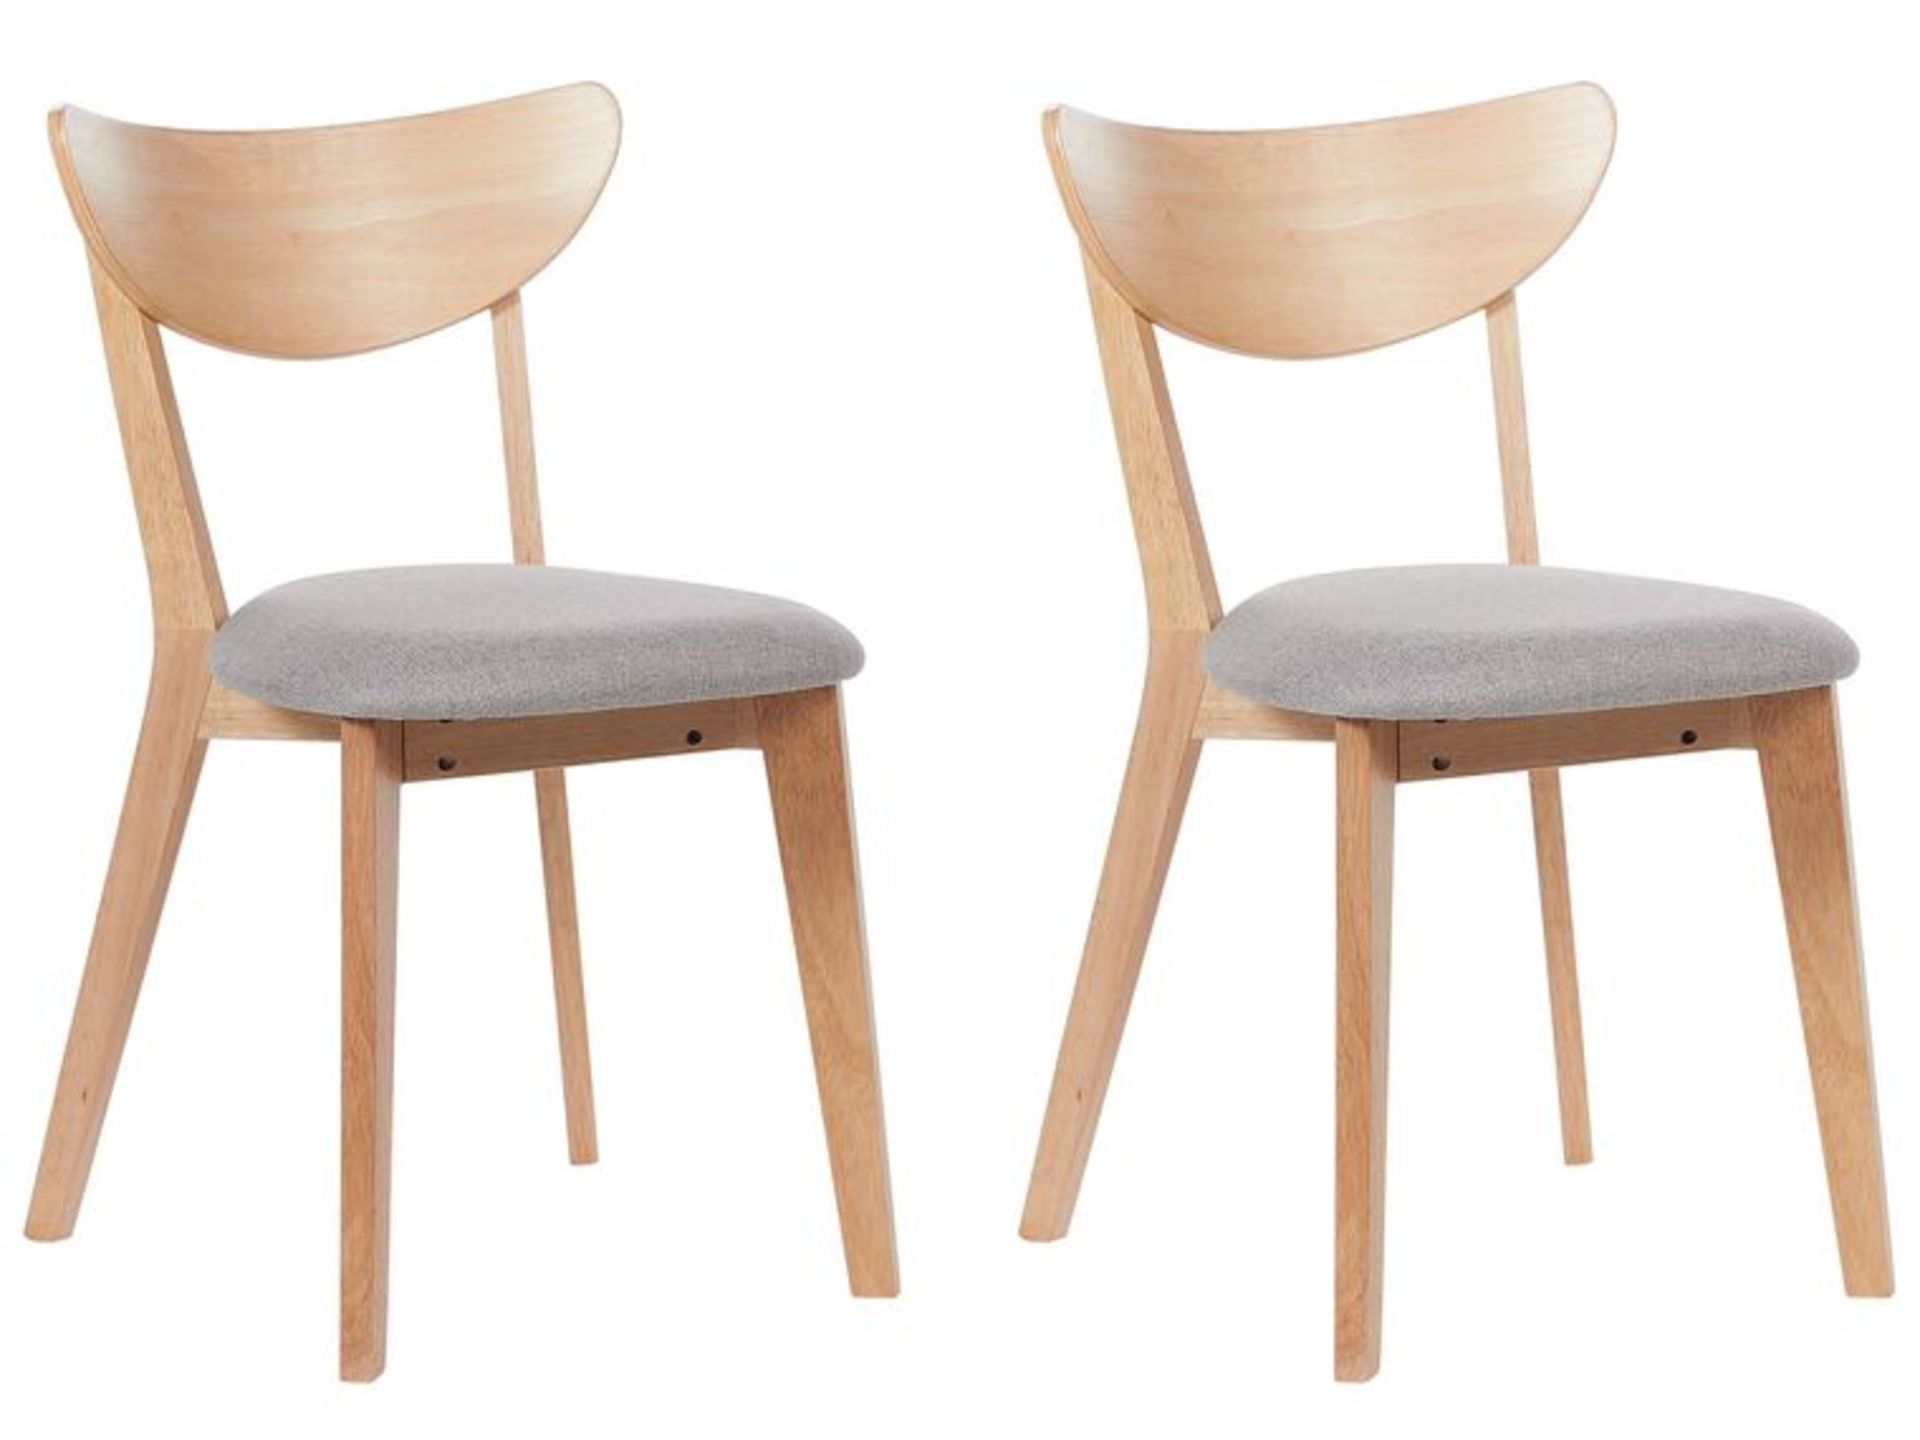 Erie Set of 2 Dining Chairs Light Wood with Grey. - SR6U. RRP £219.99. Add style to your dining room